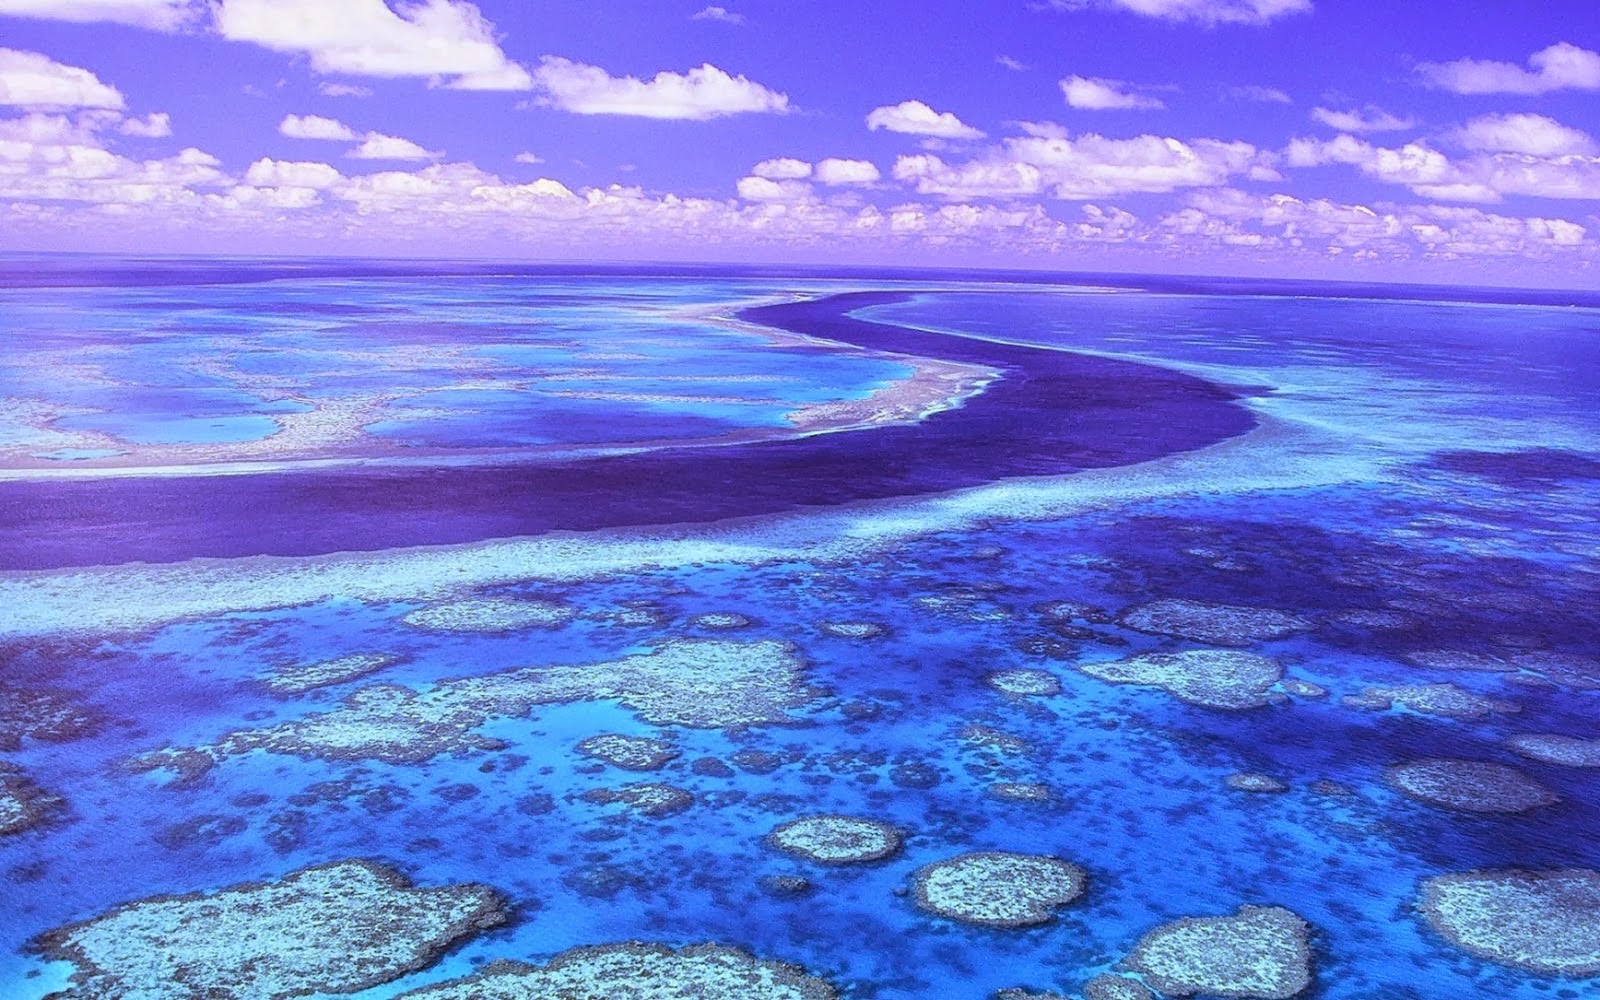 Great Barrier Reef Australia - Places YOU want to visit